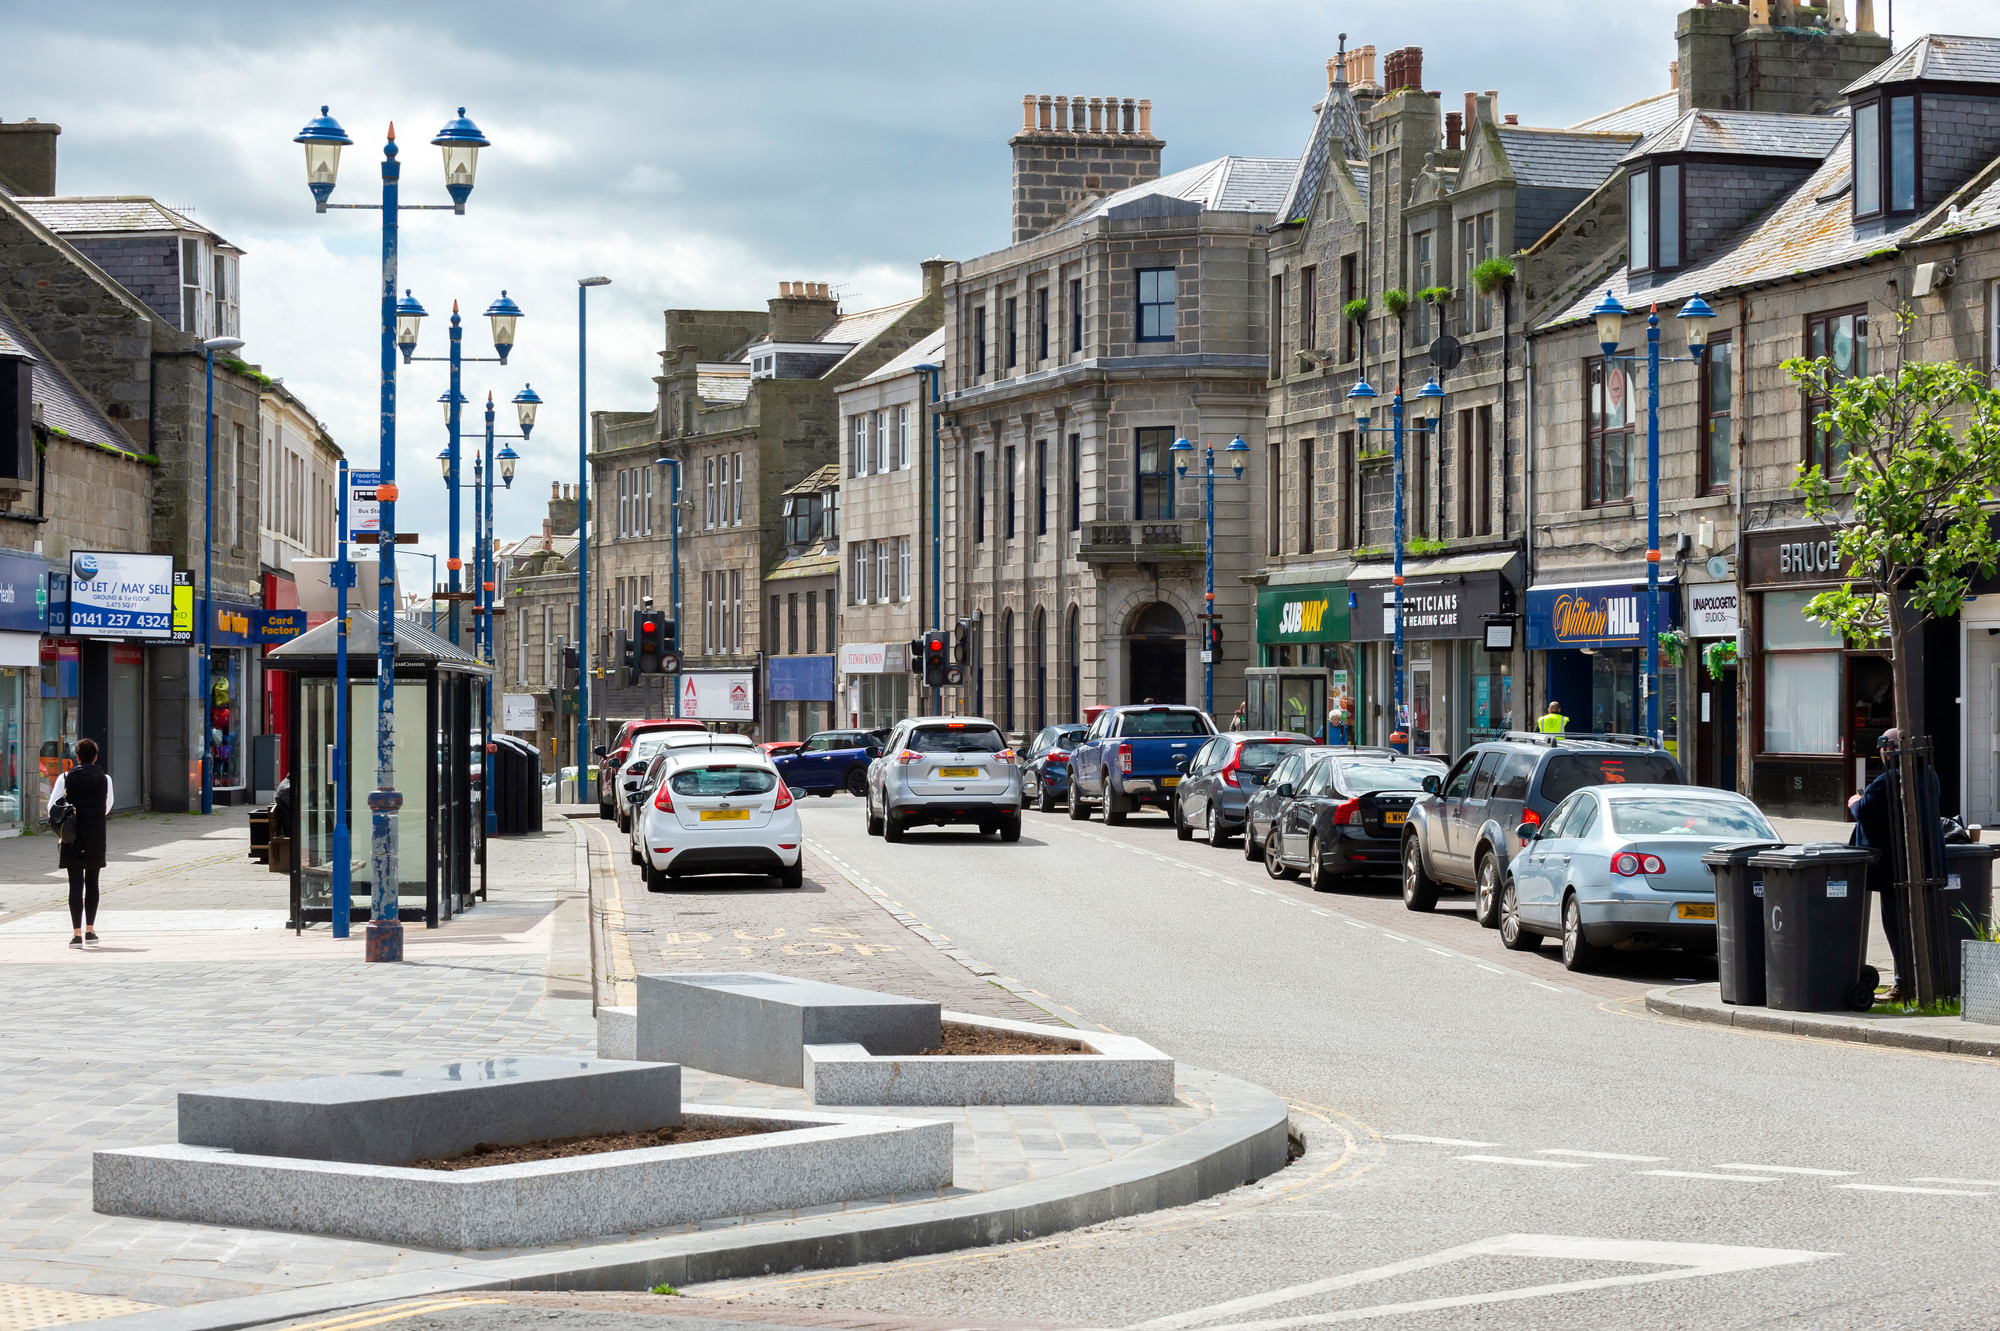 A photograph of Fraserburgh town centre featuring shops, cars, pedestrians, blue street lamps and some trees